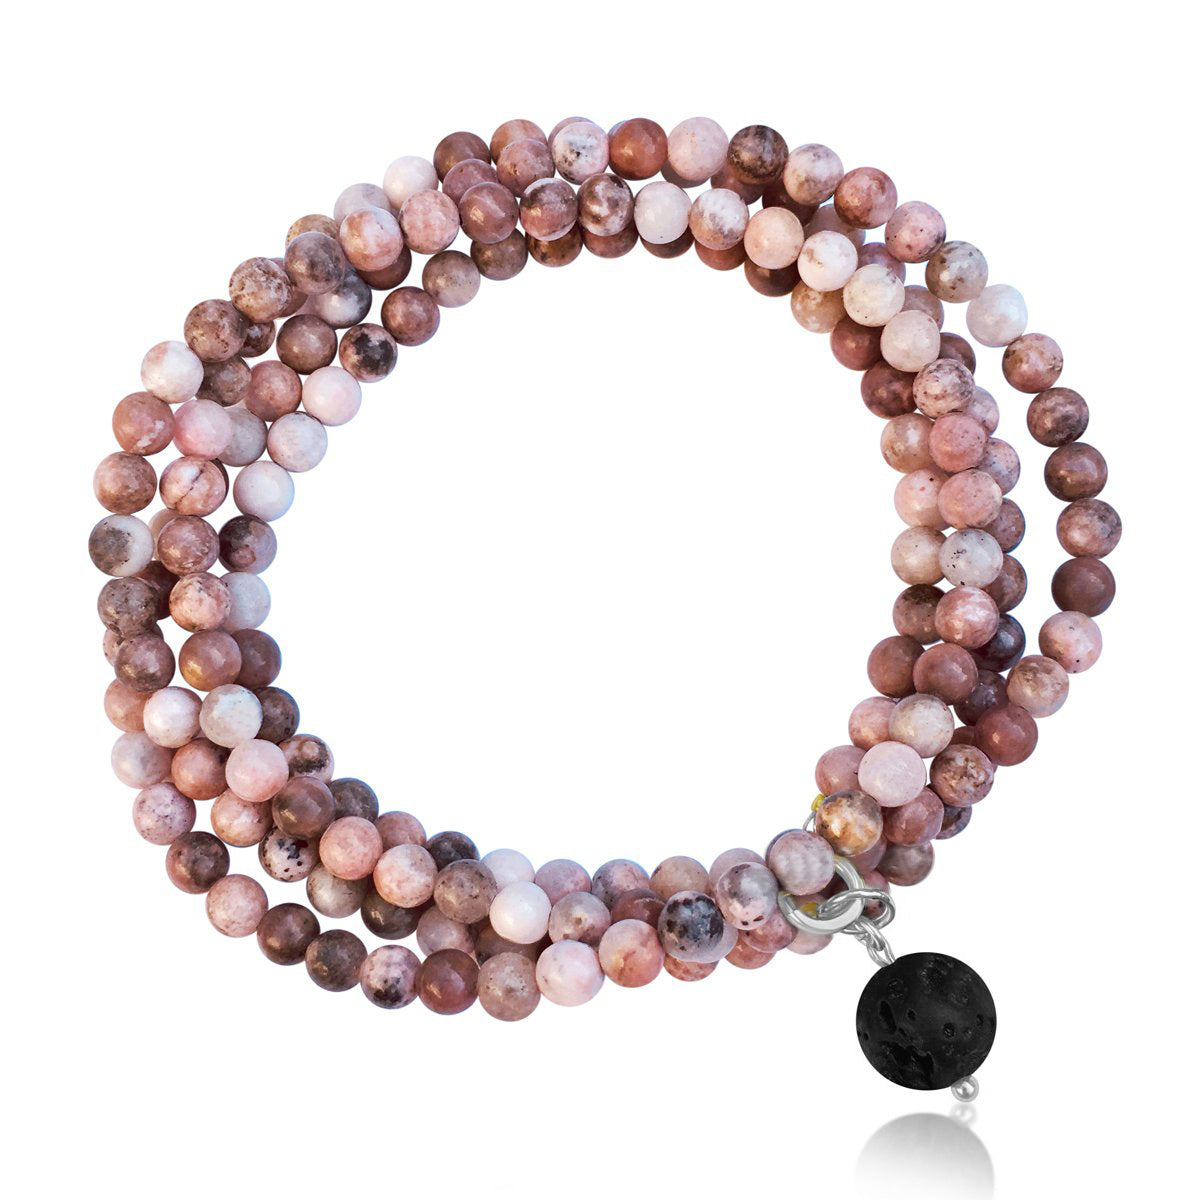 Peach Pink & Rose Tan Earth Toned Jasper Wrap Bracelet with a Lava Stone Dangle for Protection. Jasper is the best gemstone for protection. Earth Toned Jasper Bracelet for Connecting Your Mind Body and Spirit.